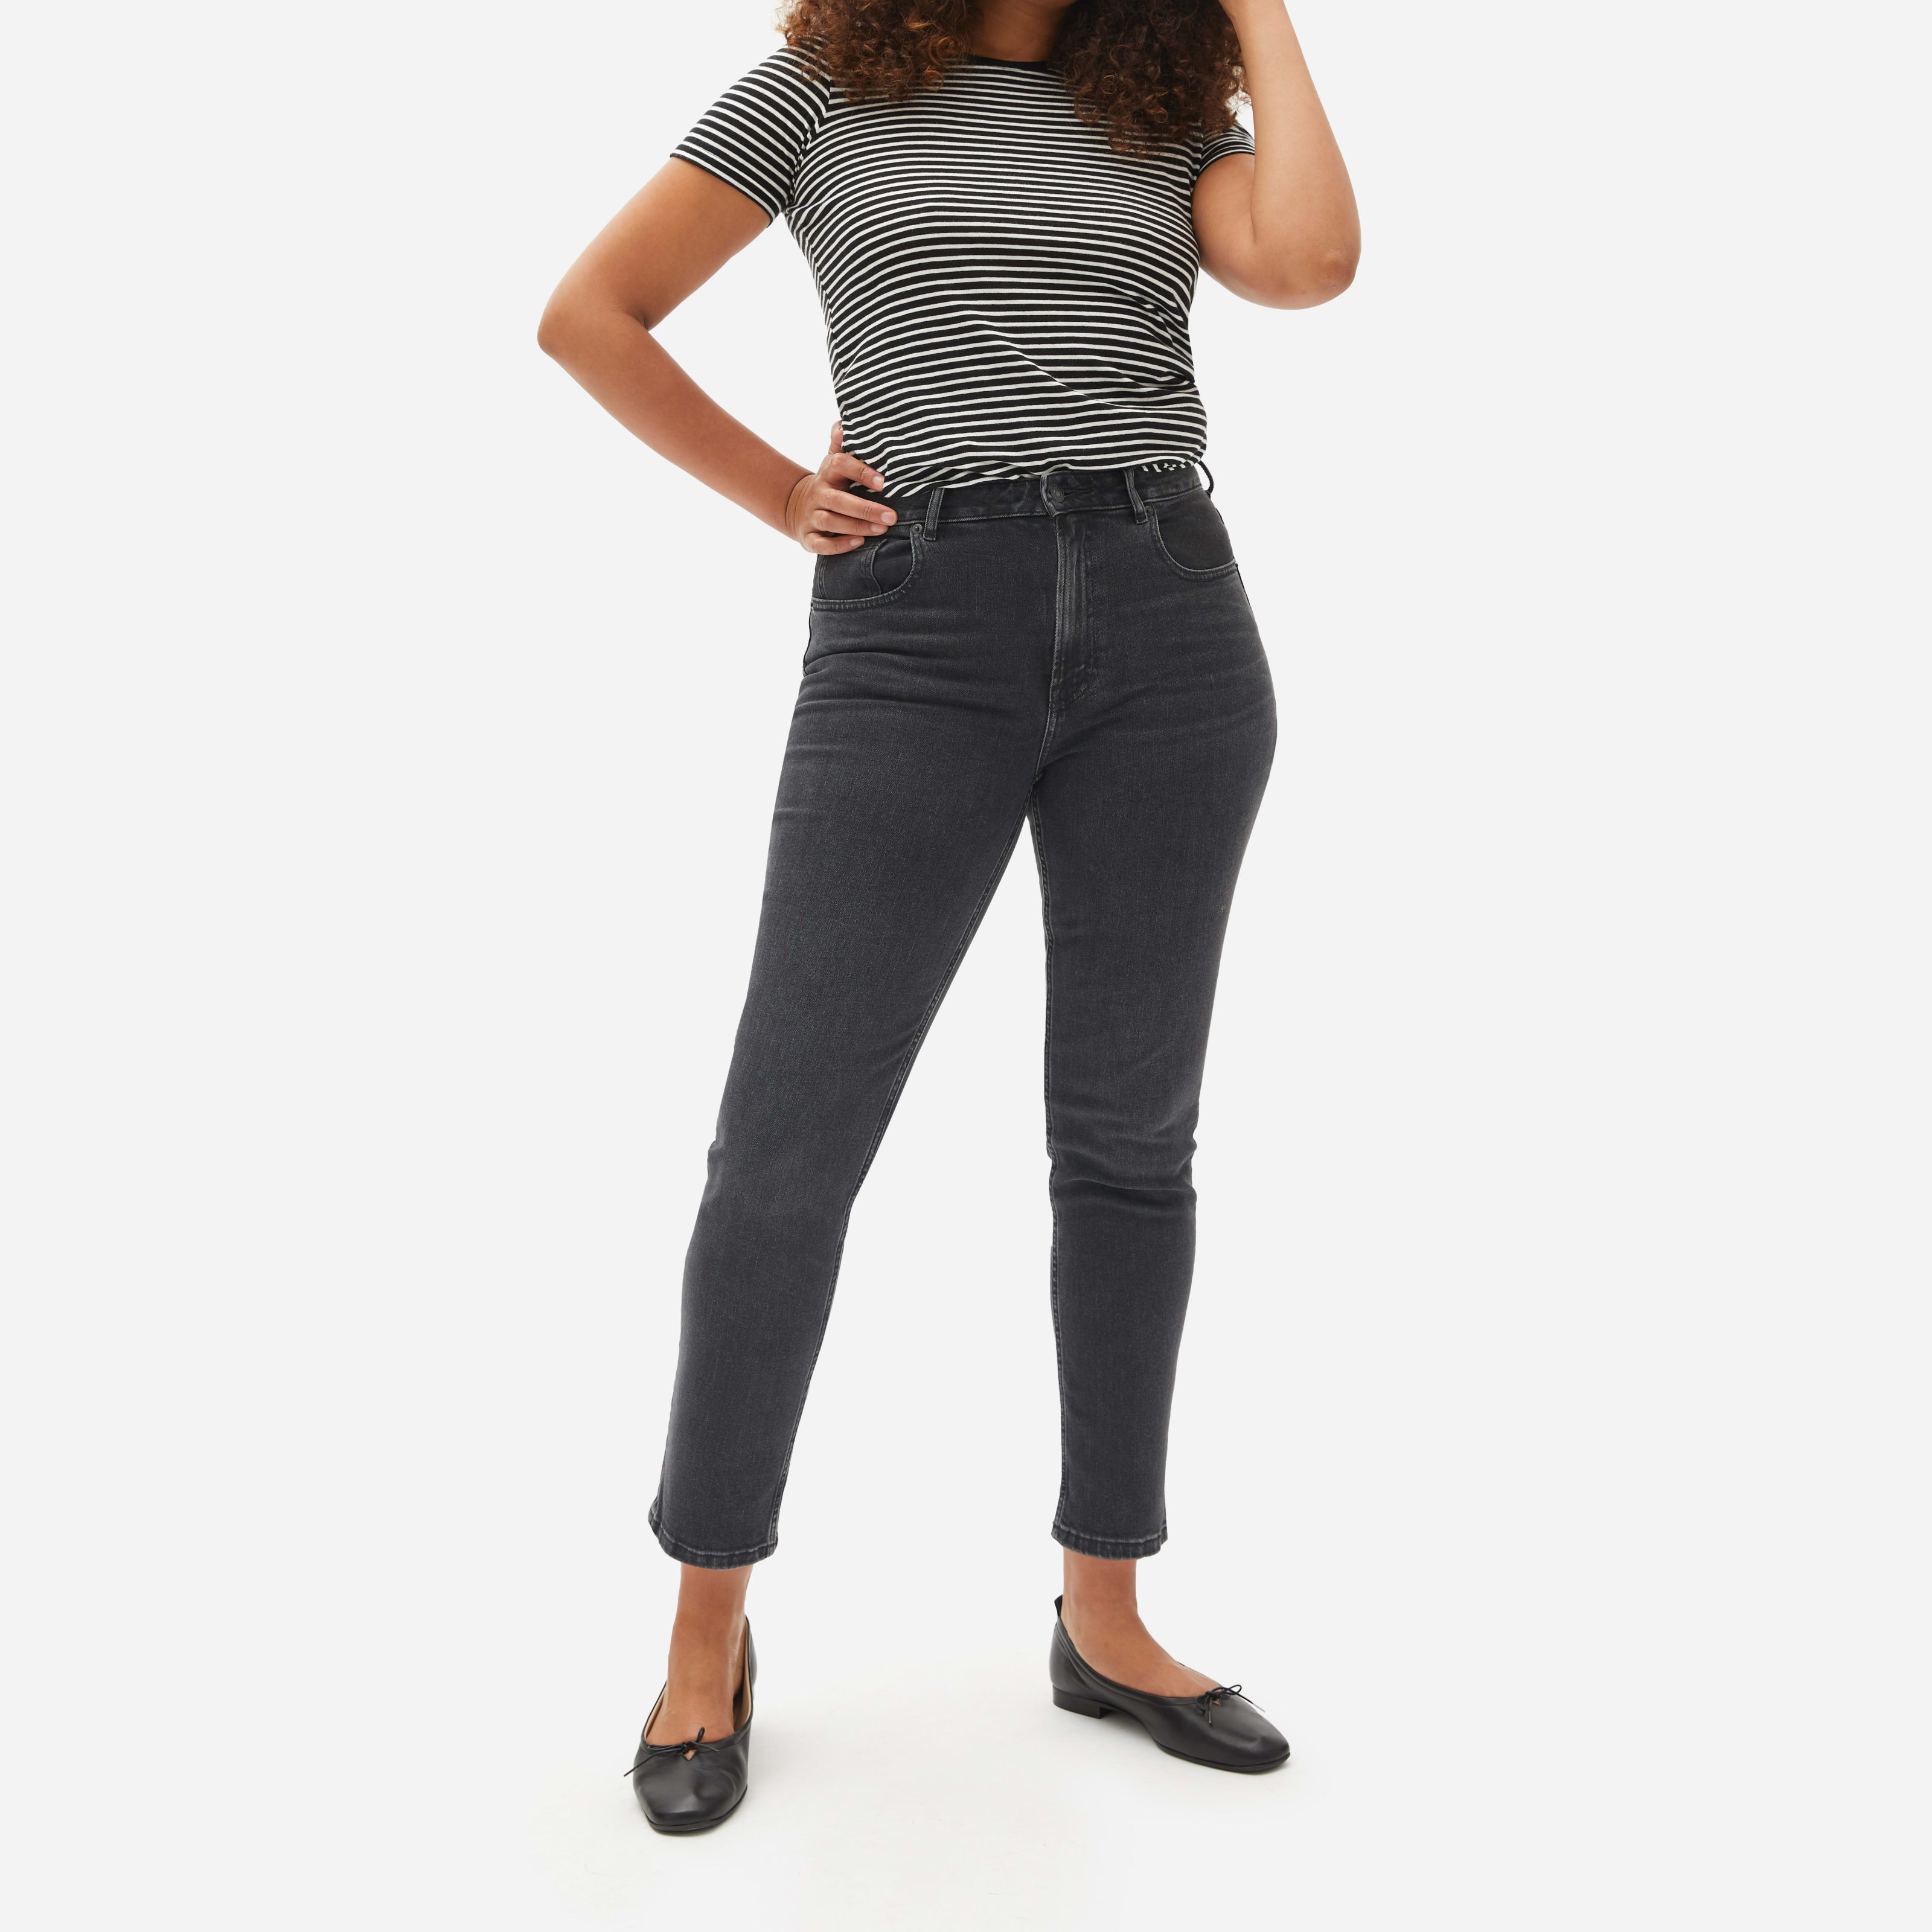 Women's Curvy Cheekyâ® Straight Jean By Everlane In Washed Black, Size 23